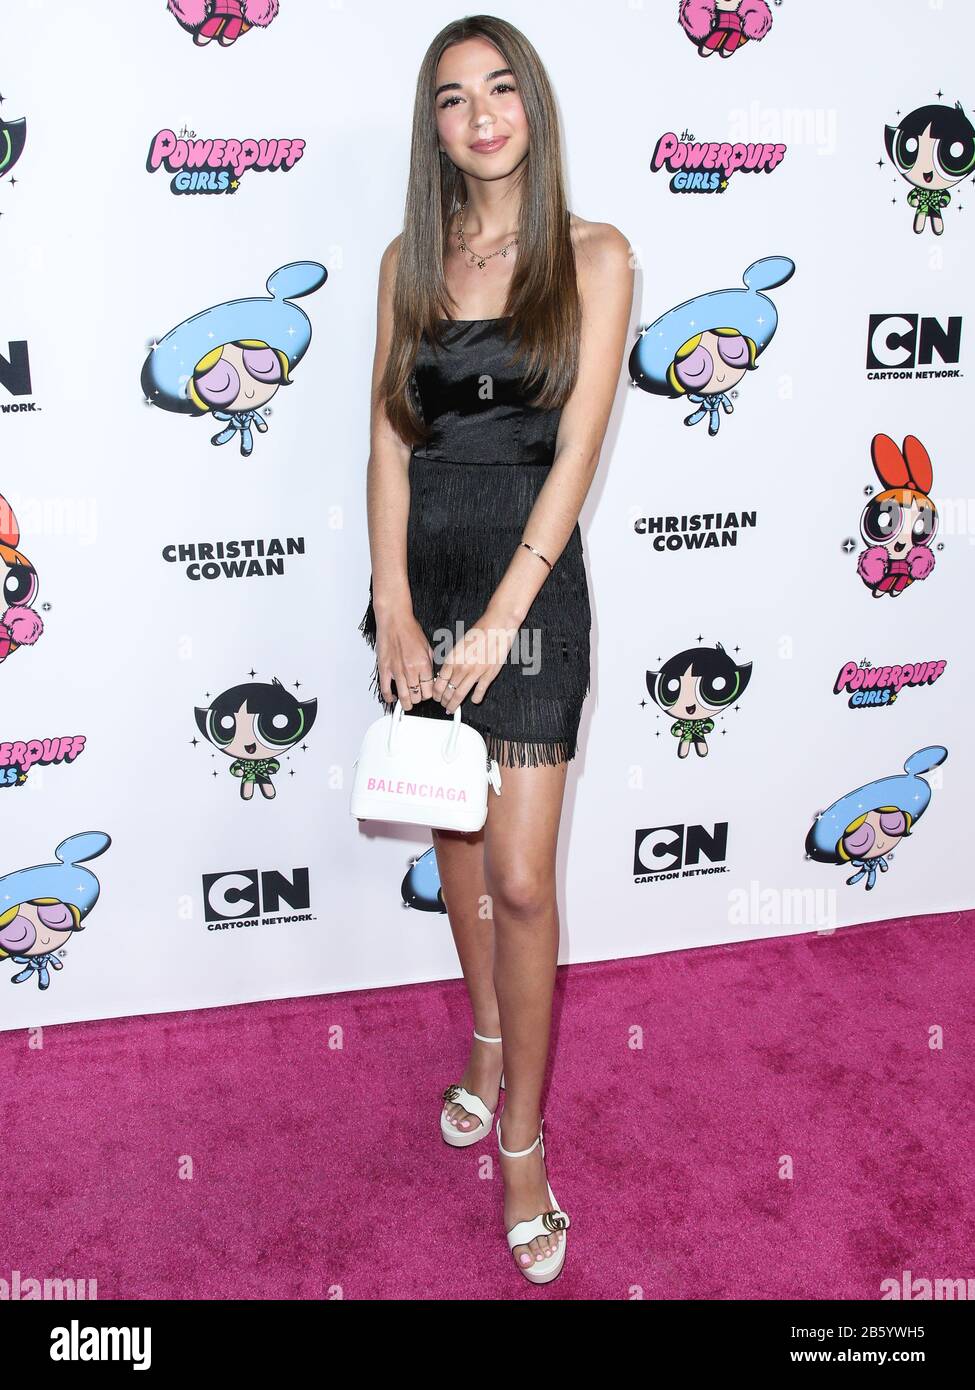 HOLLYWOOD, LOS ANGELES, CALIFORNIA, USA - MARCH 08: Evie Theodorou arrives at the 2020 Christian Cowan x Powerpuff Girls Runway Show Season II held at NeueHouse Los Angeles on March 8, 2020 in Hollywood, Los Angeles, California, United States. (Photo by Xavier Collin/Image Press Agency) Stock Photo